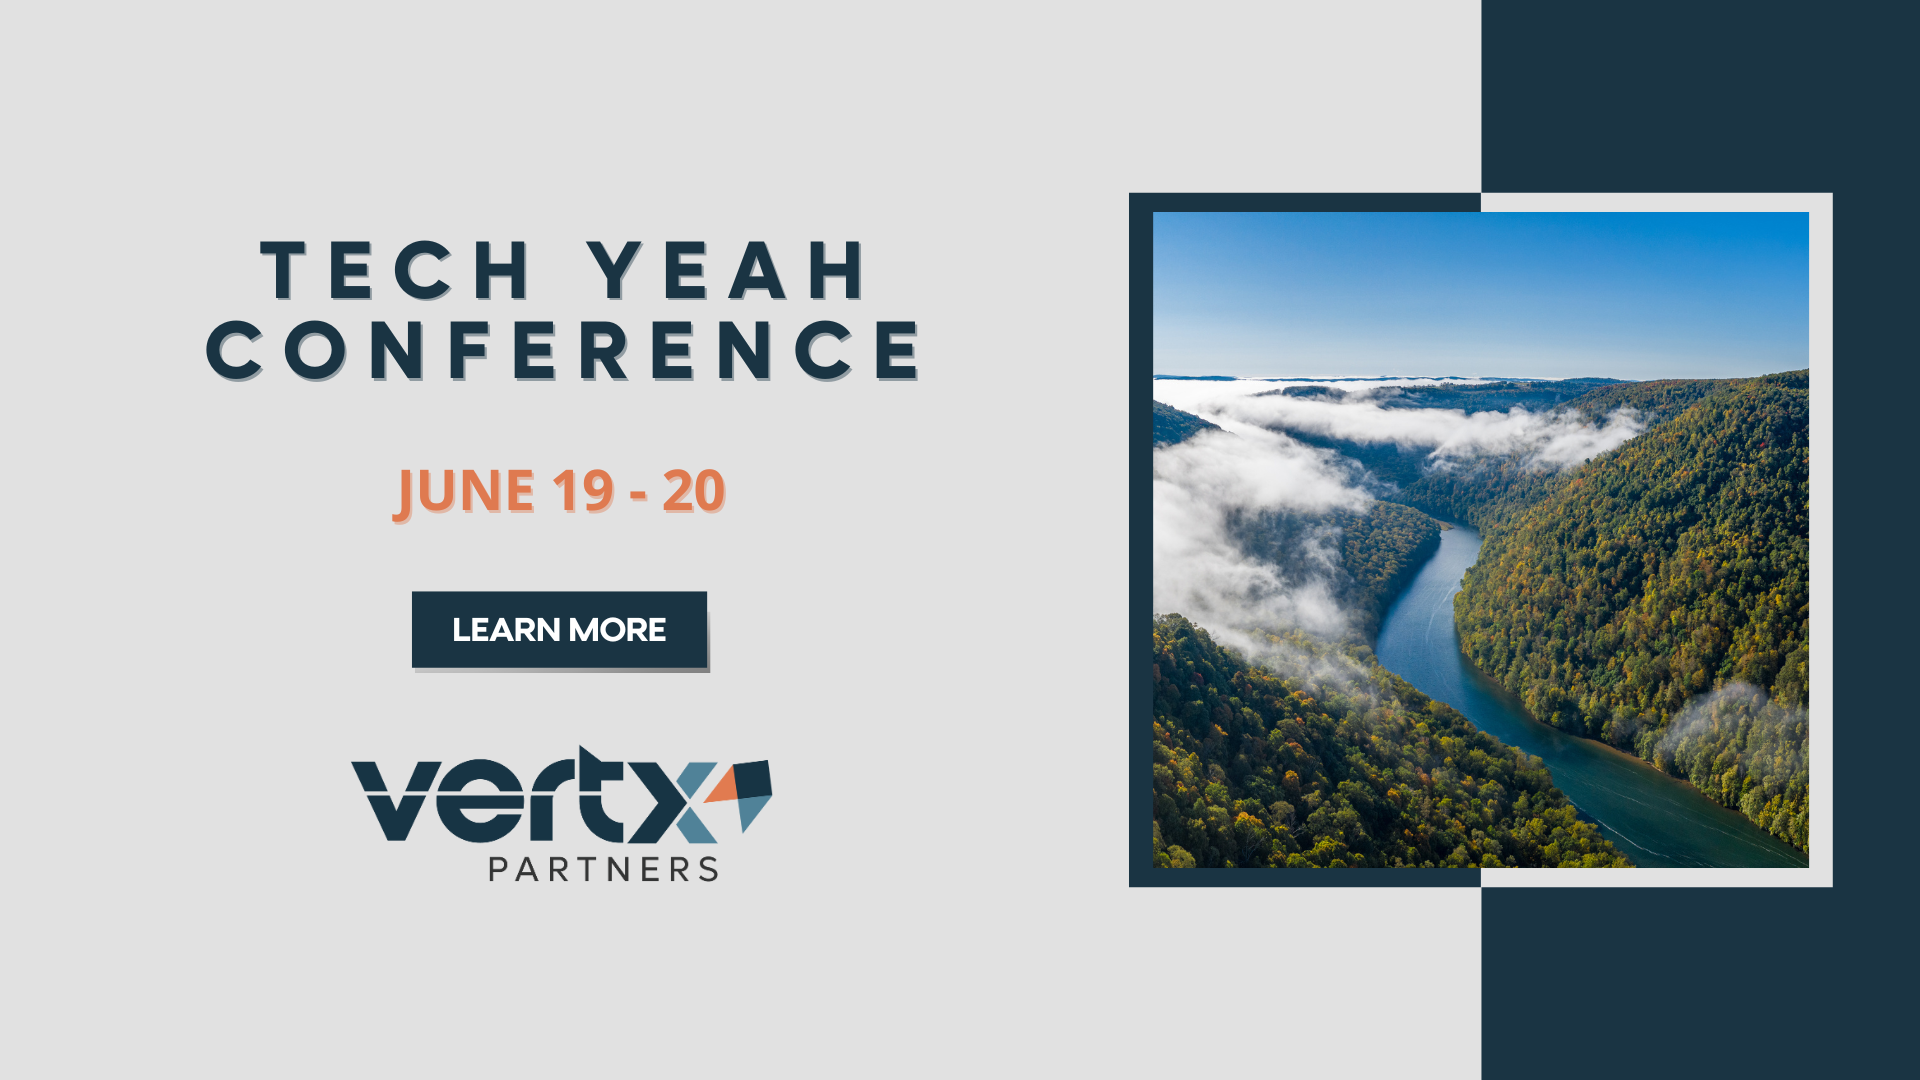 This graphic has the title "Tech Yeah Conference" with the dates June 19th - 20th with a photo to the right of mountains and a river with a blue sky and clouds.